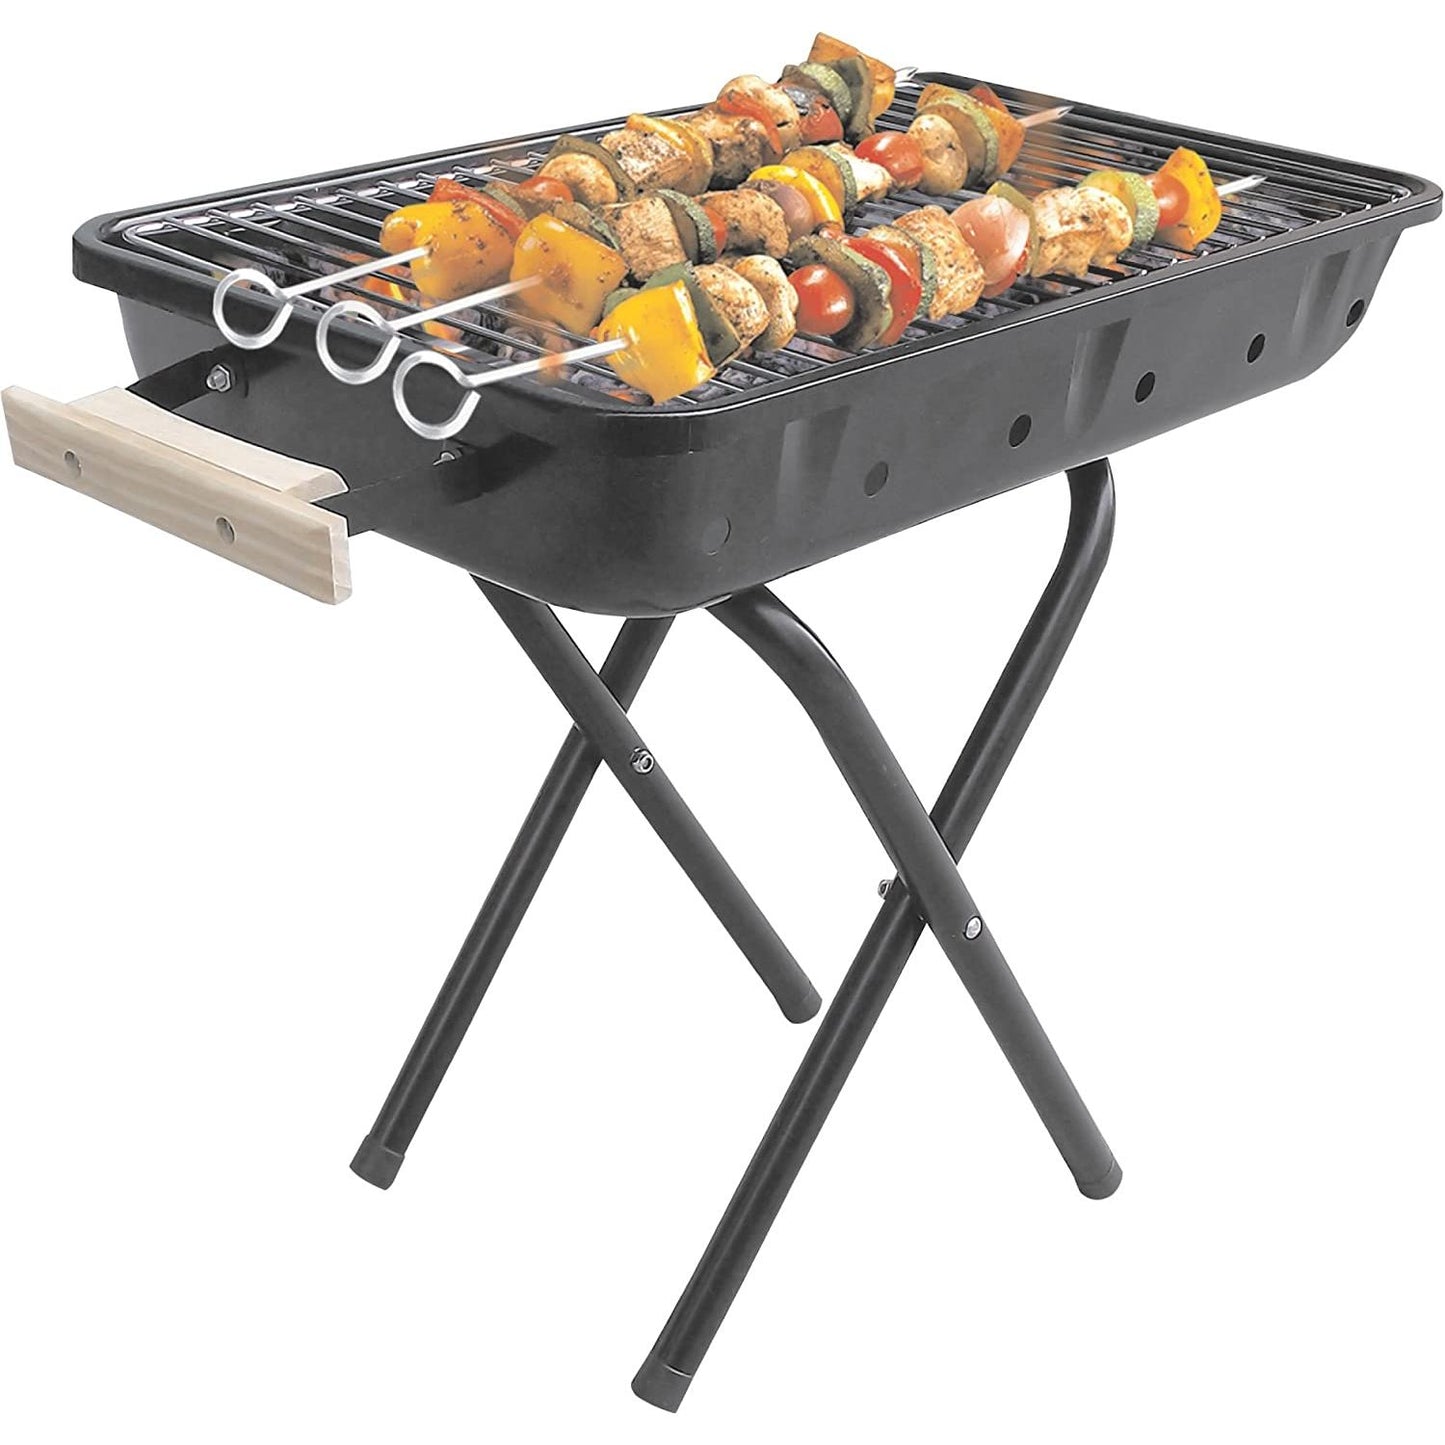 Prestige PPBW 04 Charcoal Barbecue Grill